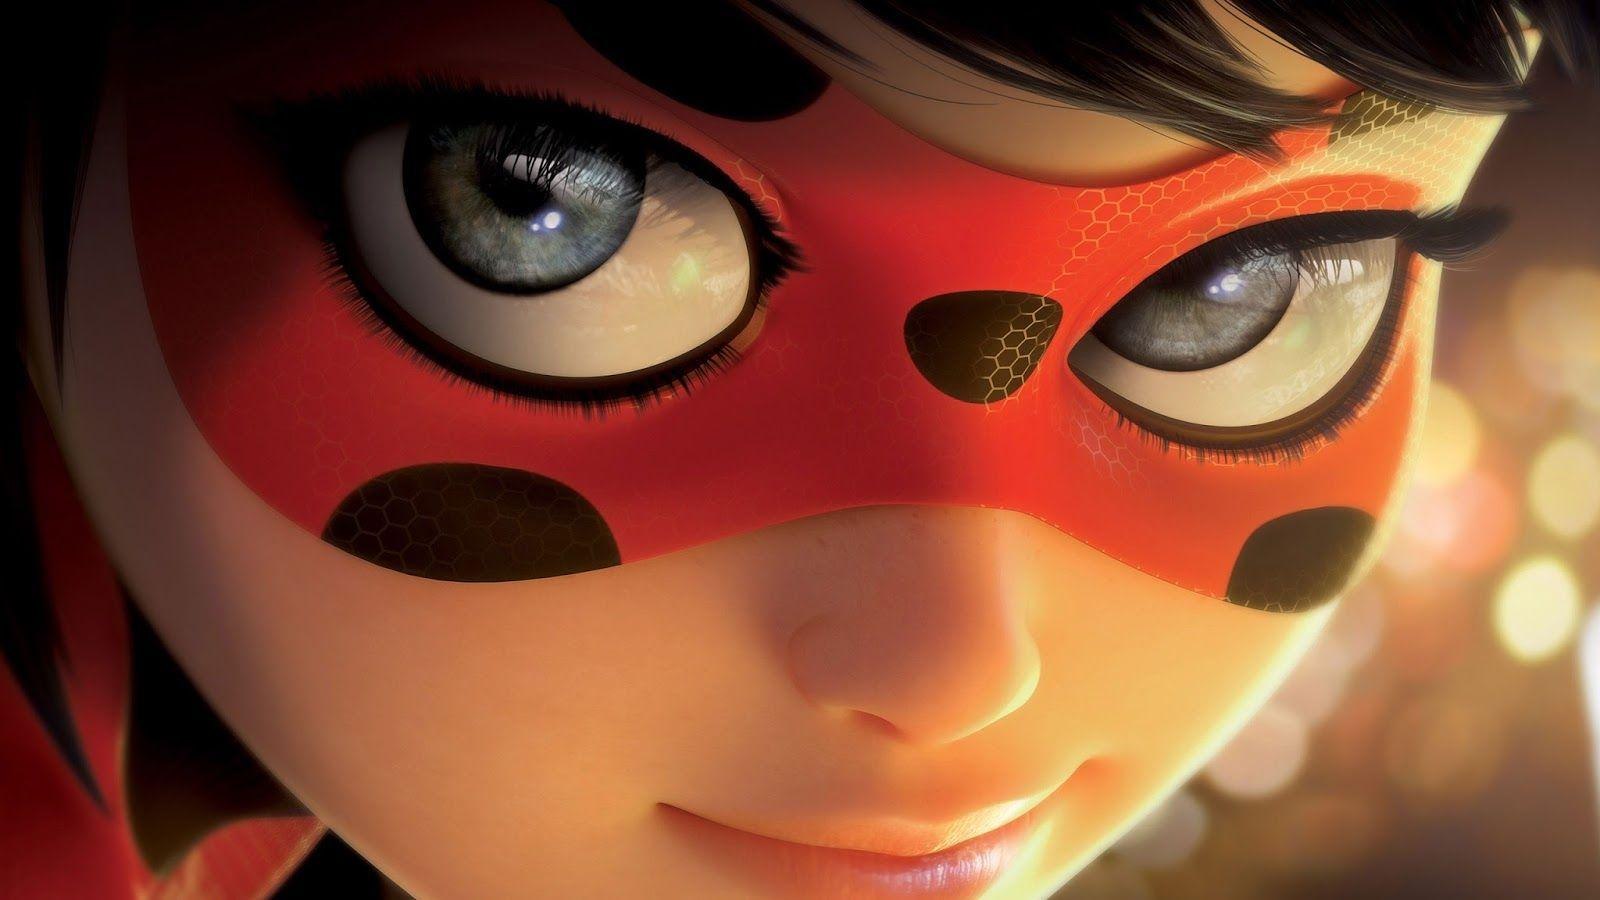 Miraculous Tales of Ladybug And Cat Noir Wallpapers Full HD 